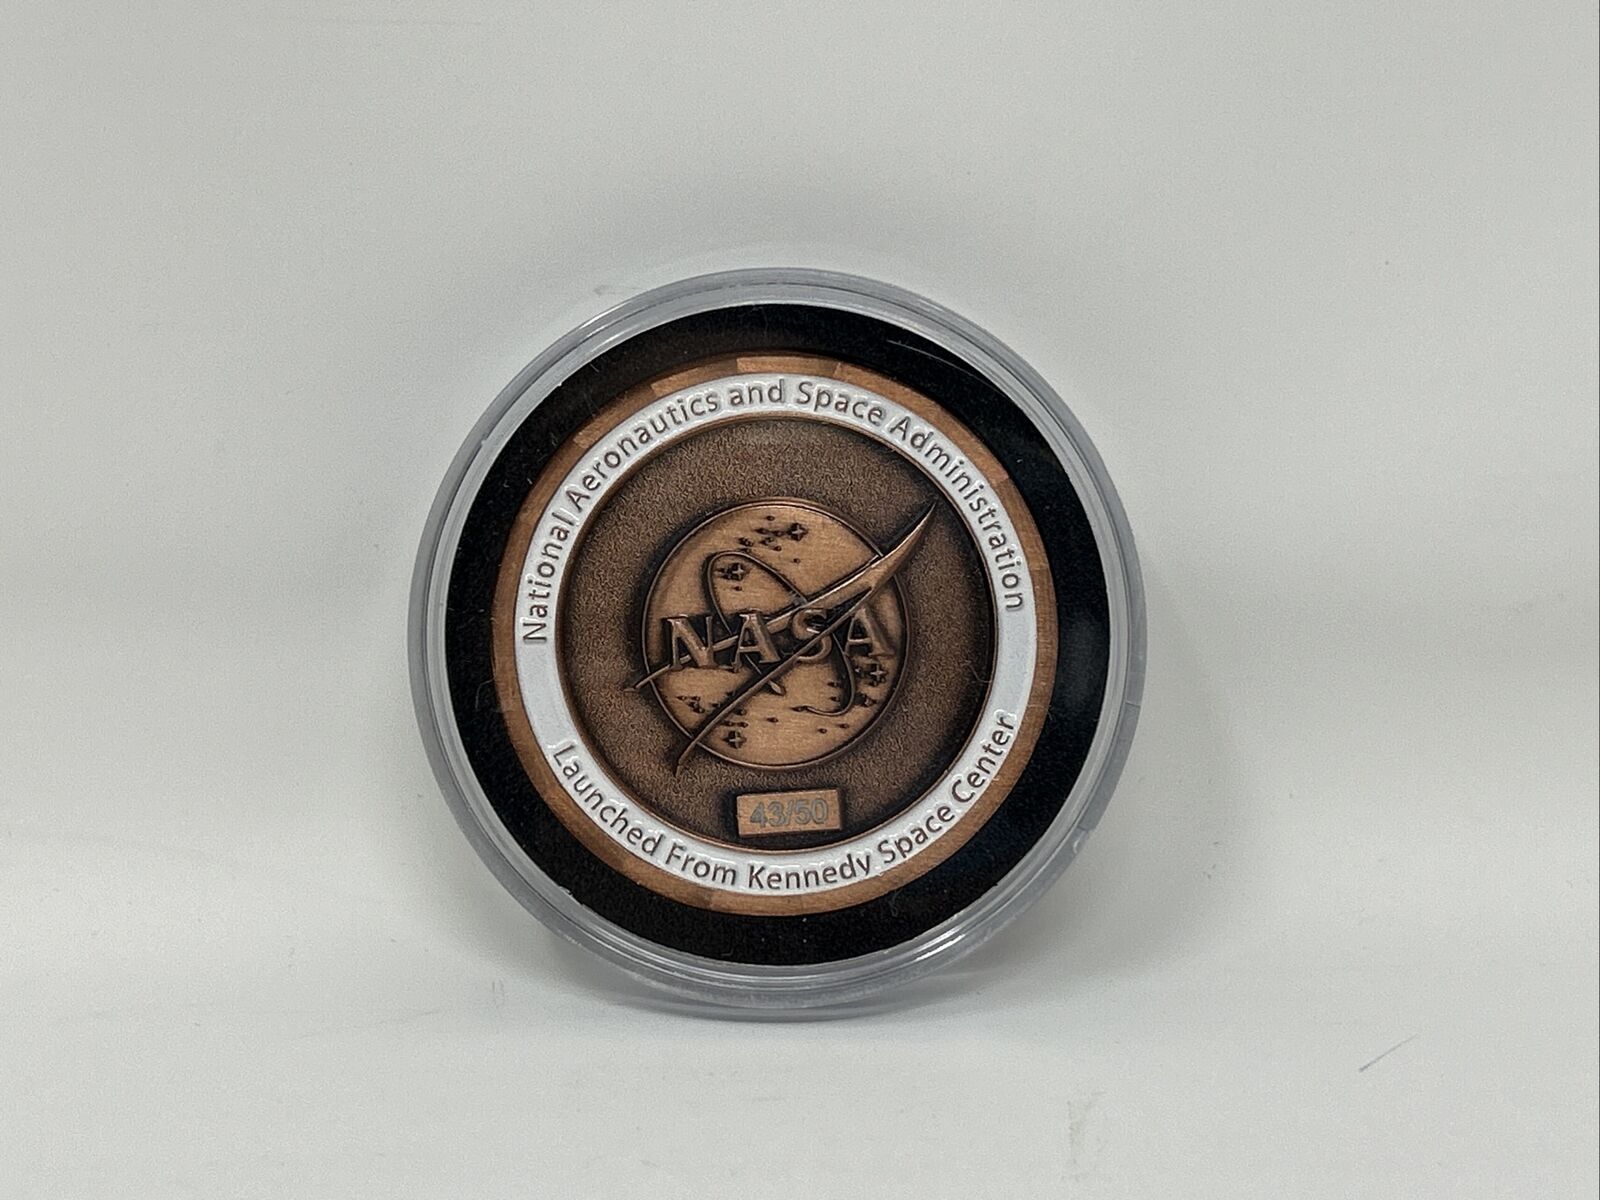 SpaceX Crew-8 Mission *Limited Edition* Coin, Serialized/Stamped: 43/50.